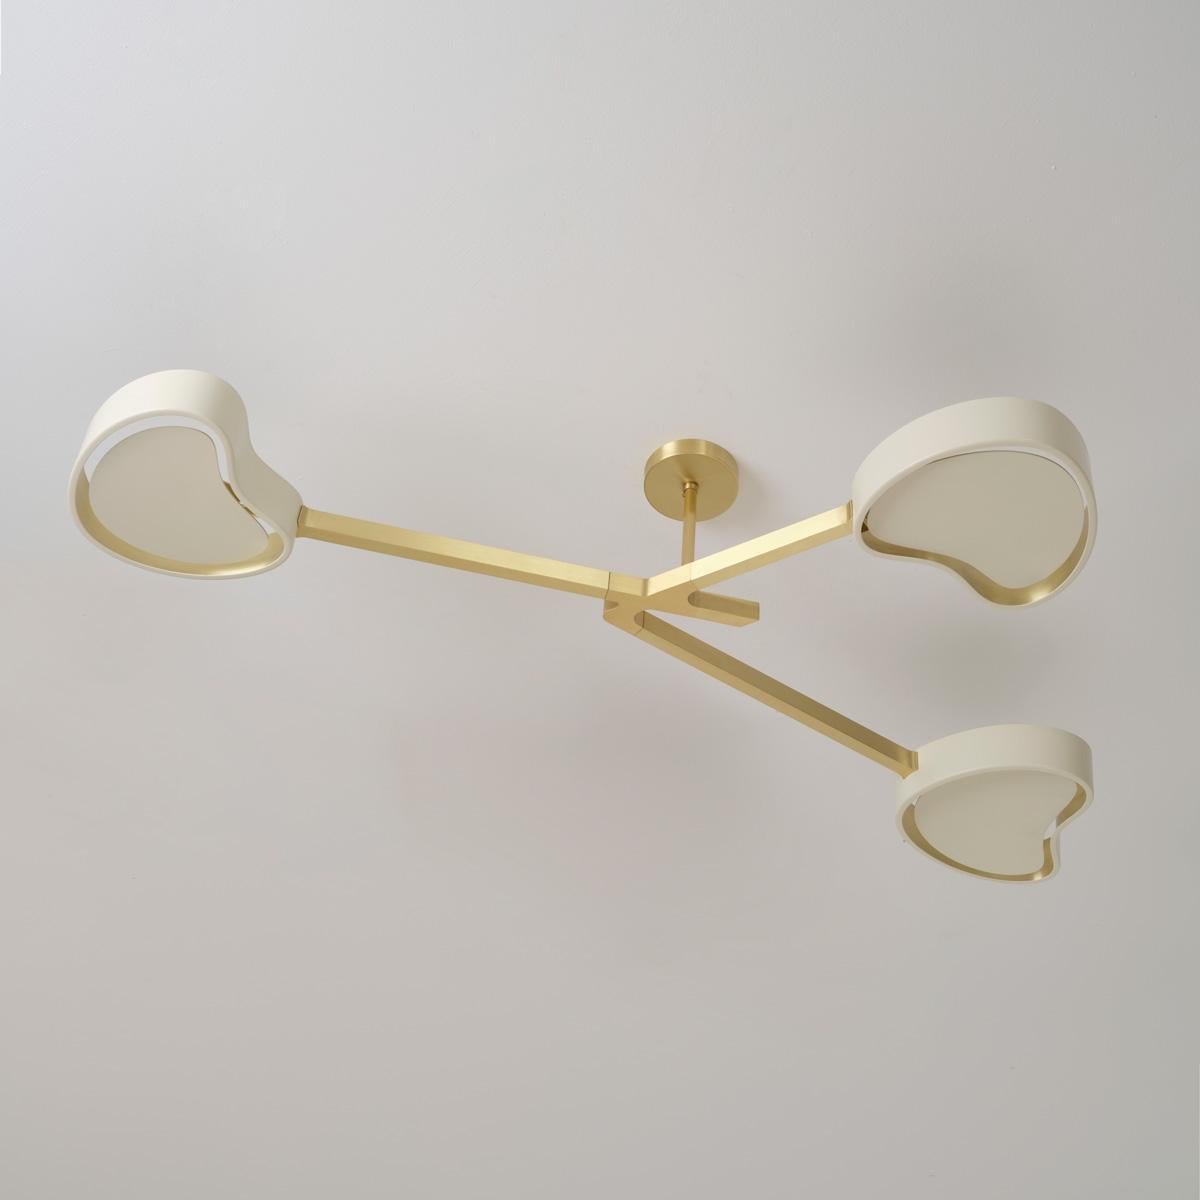 Cuore N.3 Ceiling Light by Gaspare Asaro. Peltro and Bronze Finish For Sale 2